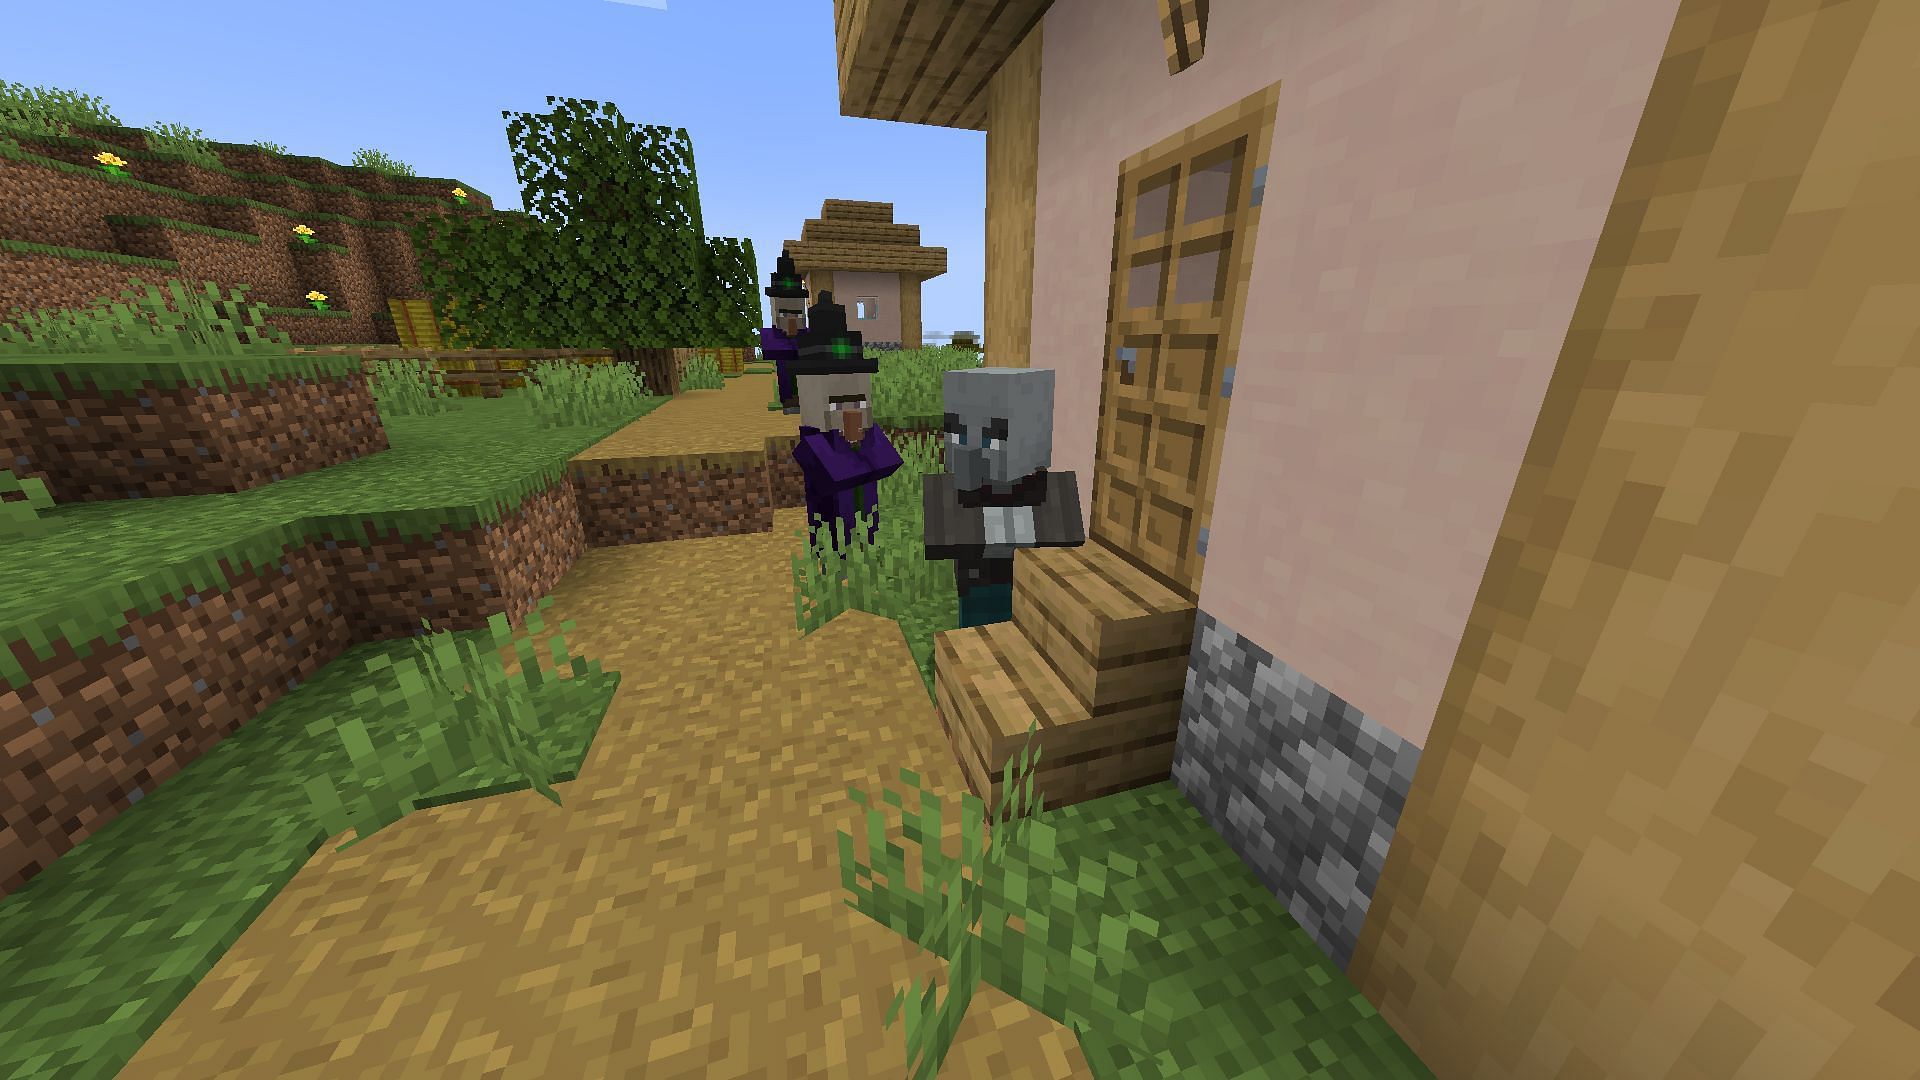 Illagers will be visible through walls if bells are rung in a village during a raid (Image via Mojang)